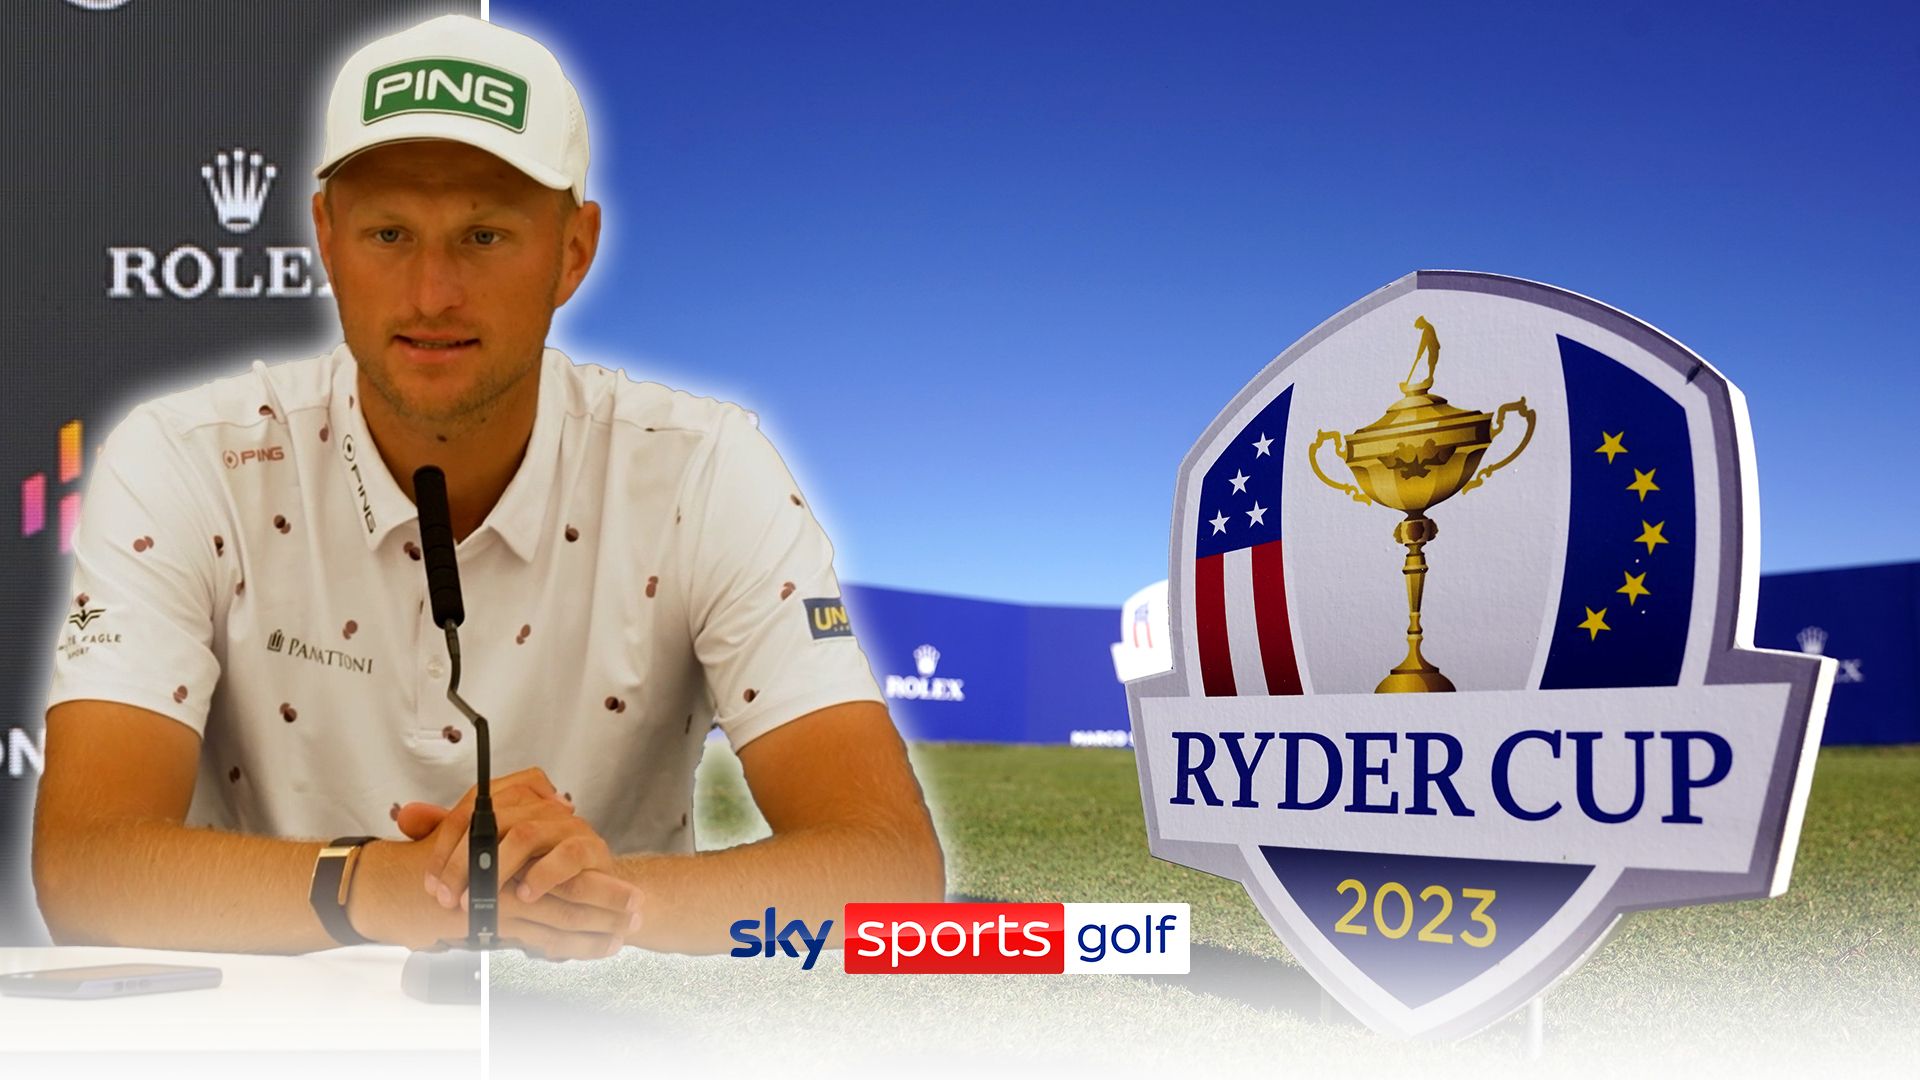 'From shock, to sadness, to anger' | Meronk on Ryder Cup omission